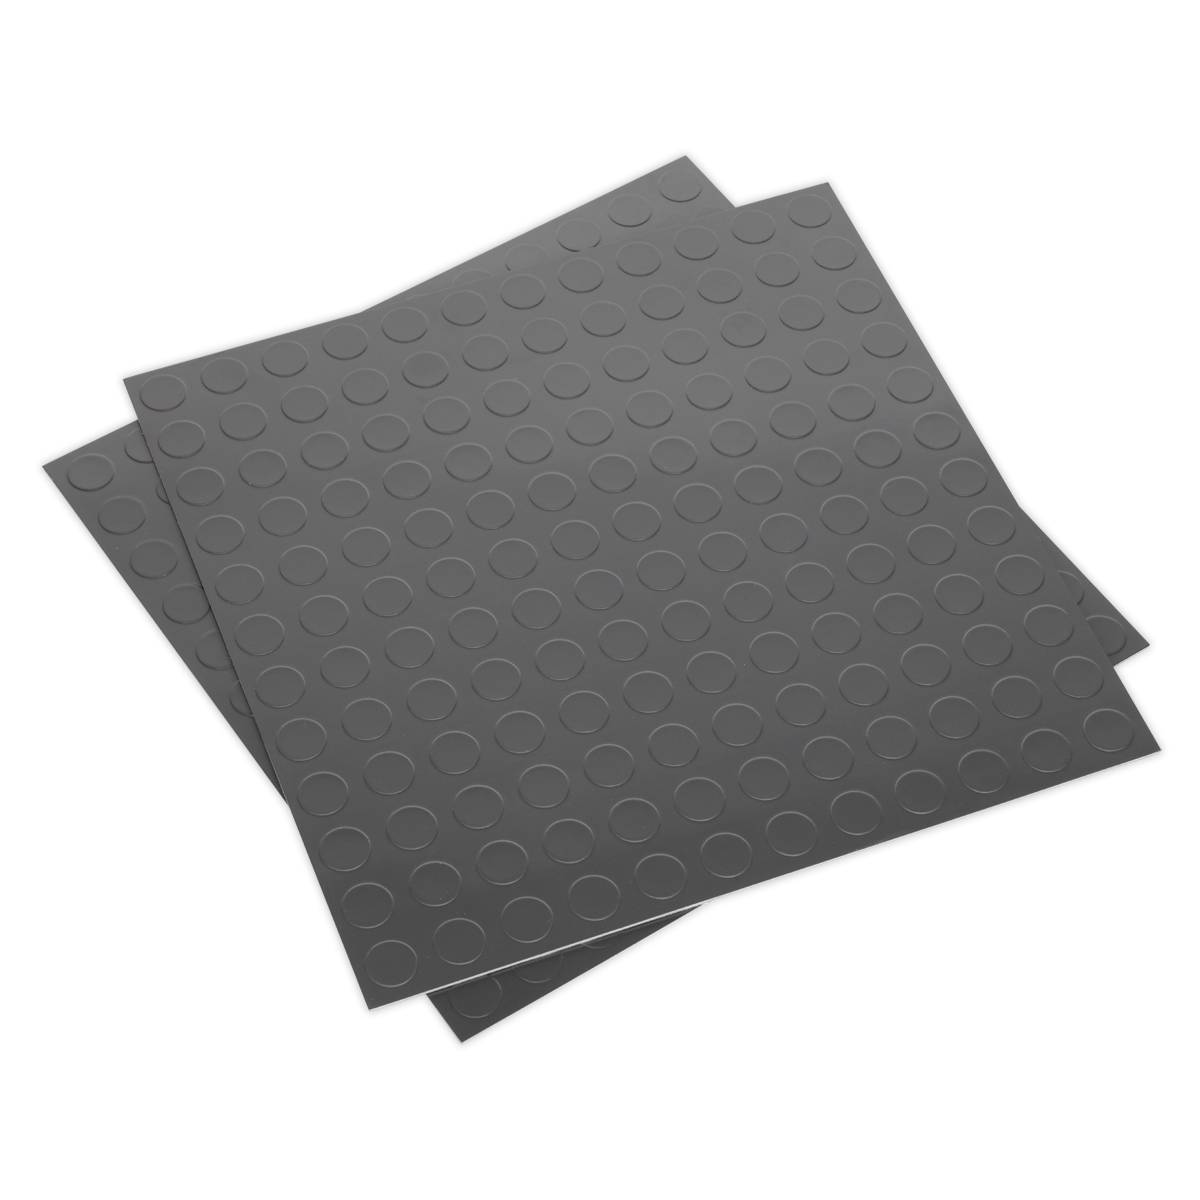 Sealey Vinyl Floor Tile with Peel & Stick Backing - Silver Coin Pack of 16